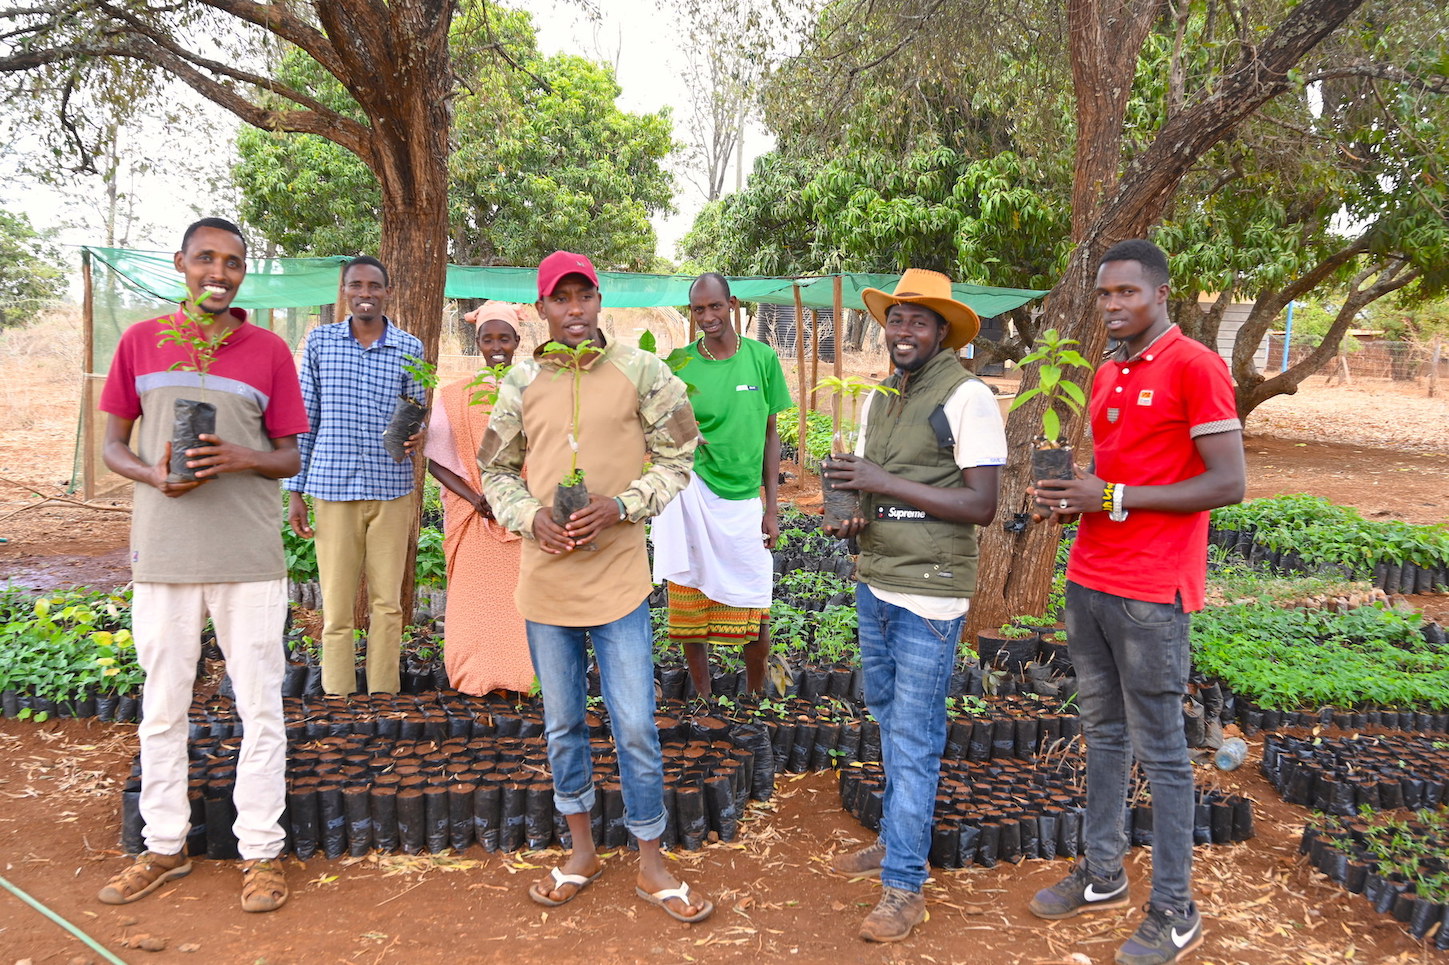 Tree planting and environmental conservation initiatives give youth hope for a better tomorrow.